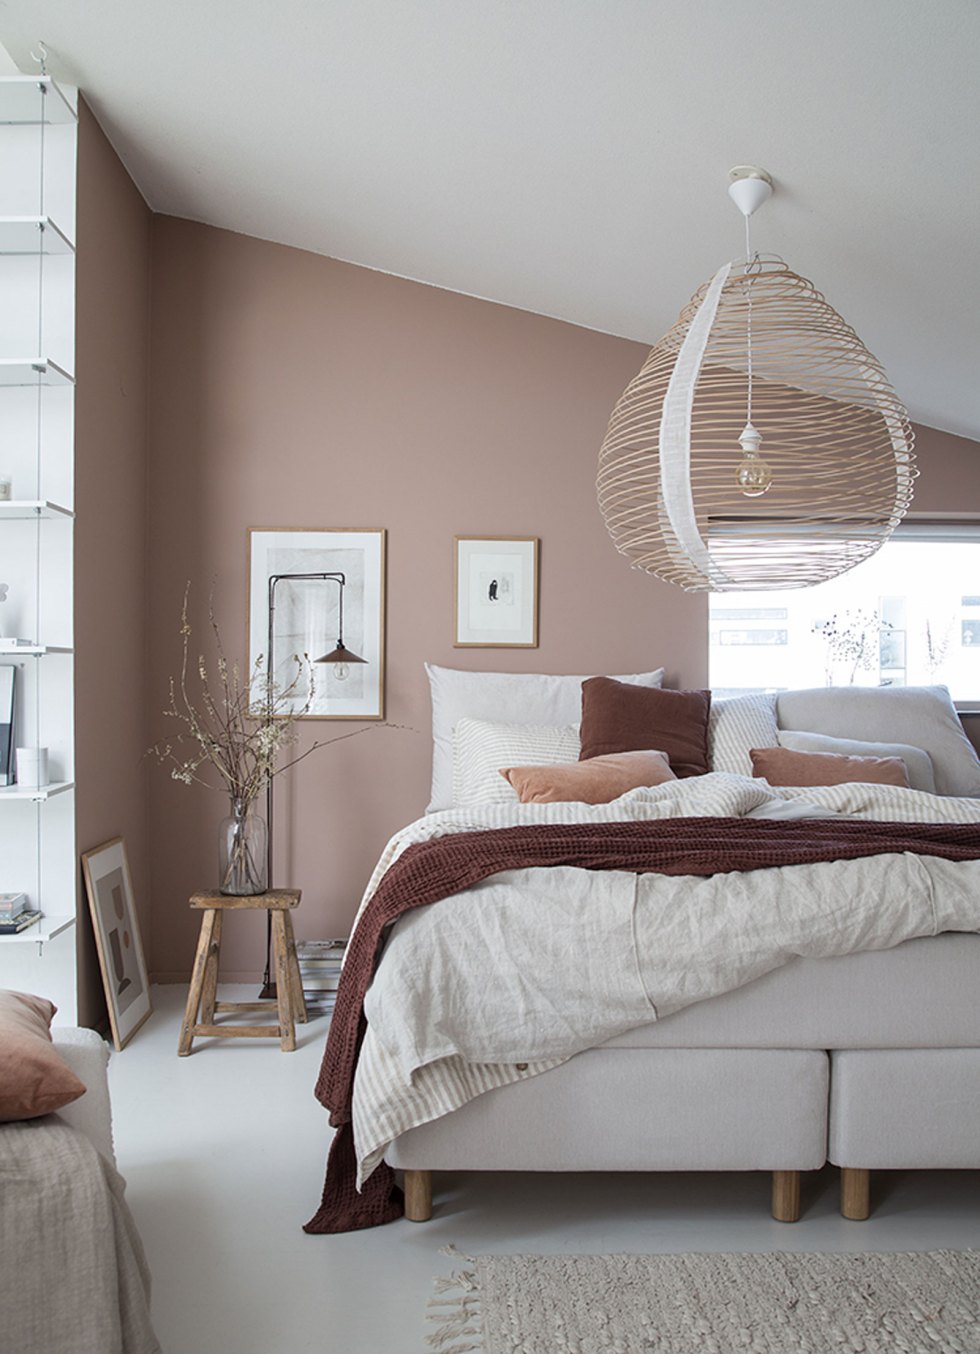 a warm and soft Scandinavian bedroom with mauve walls, a creamy bed, a woven lamp, artworks and a shelving unit by the window